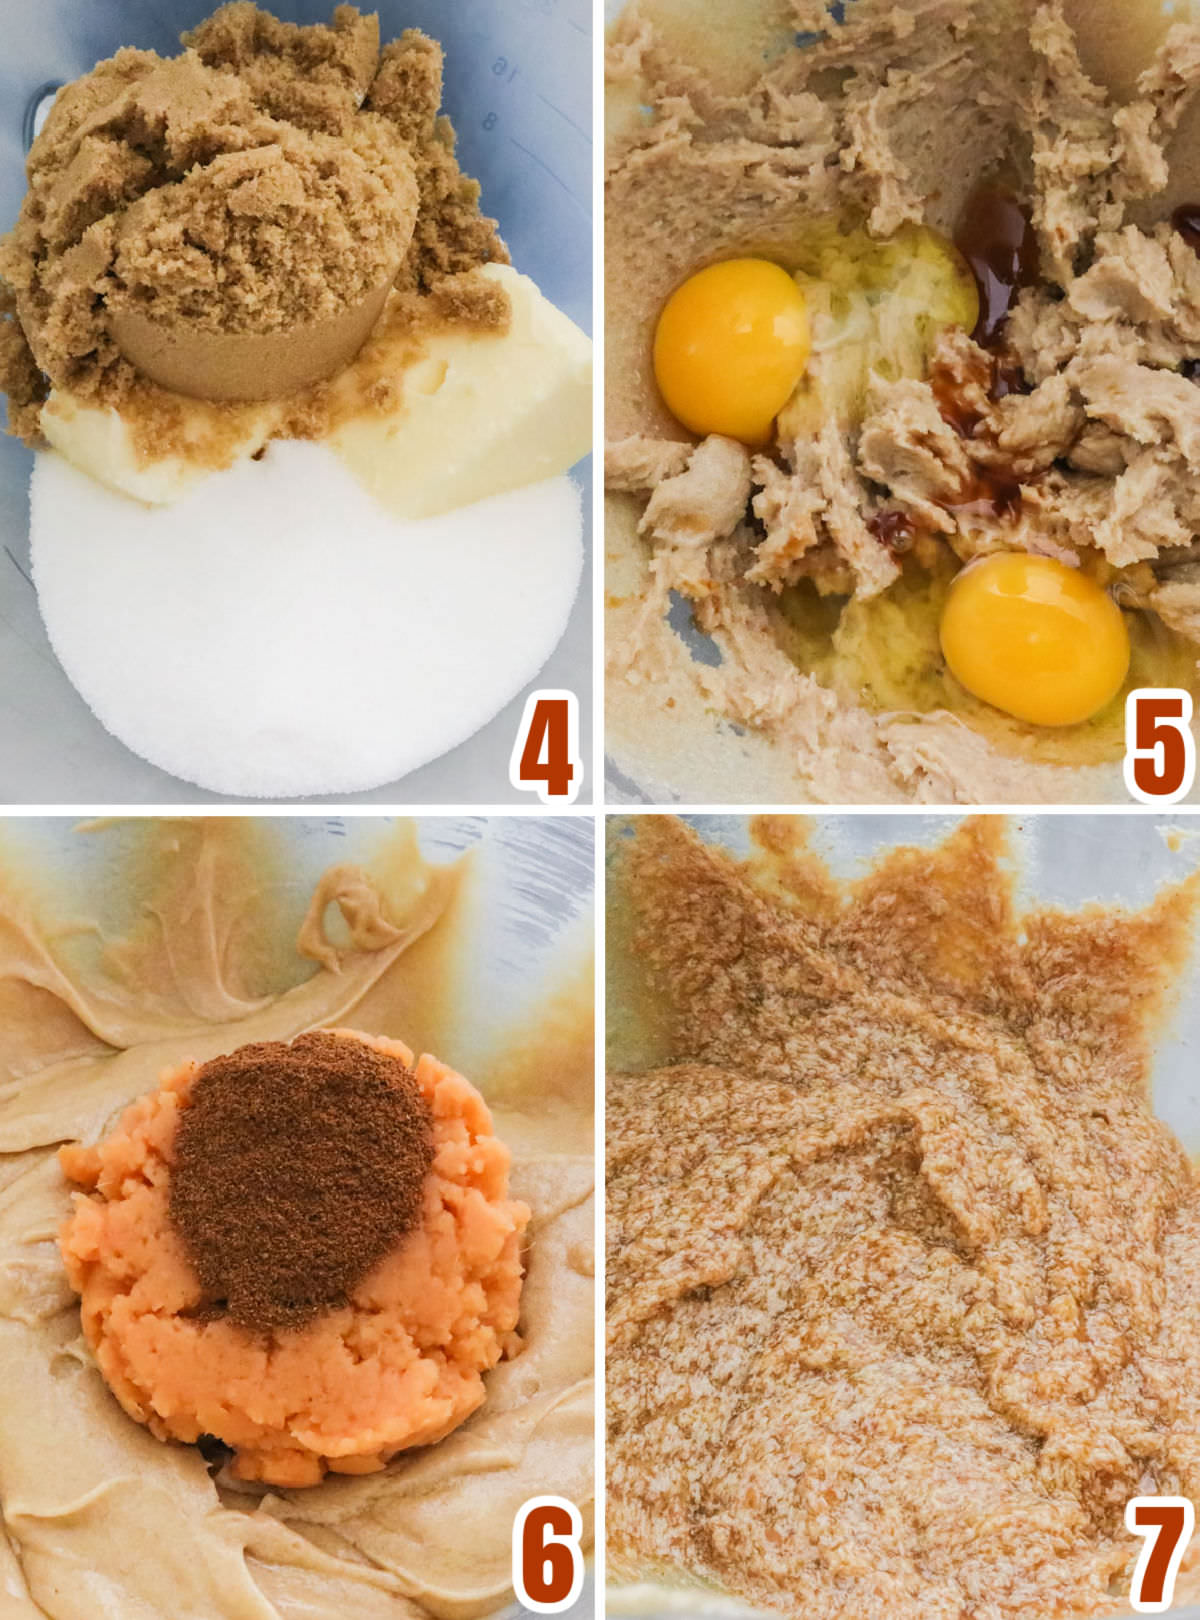 Collage image showing the steps for making the Sweet Potato Cookie dough.